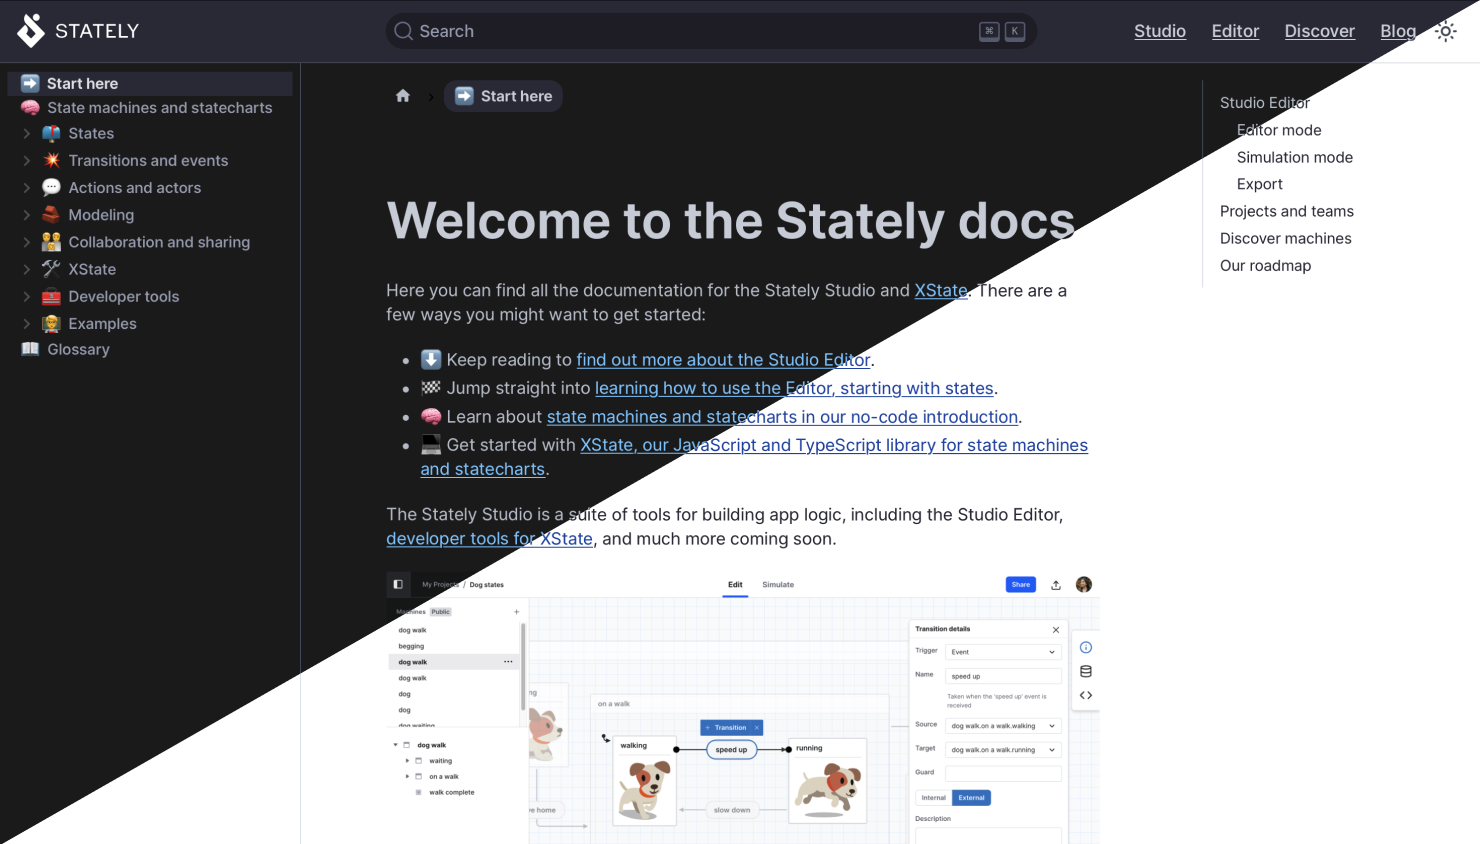 Stately docs homepage split into light mode and dark mode.